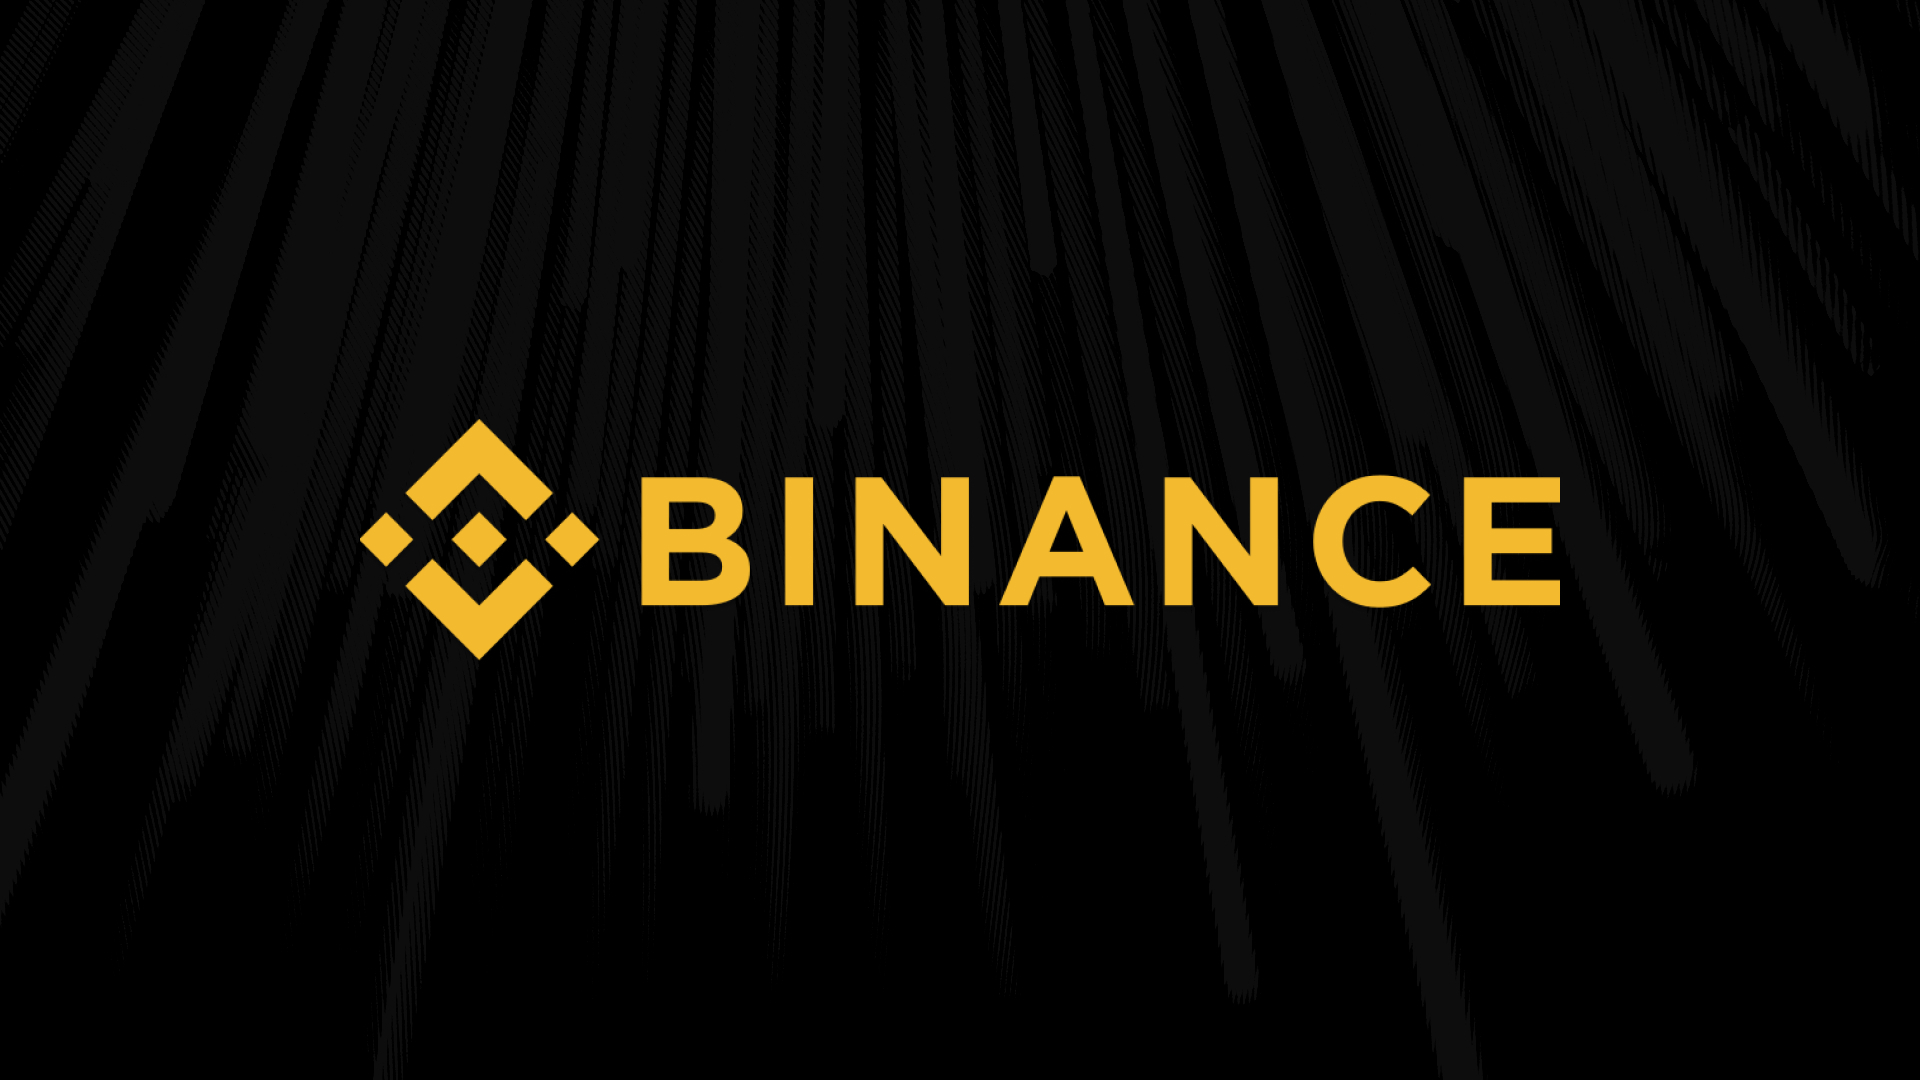 Binance To Operate Back in Japan as PM Reaffirms Web3 Adoption